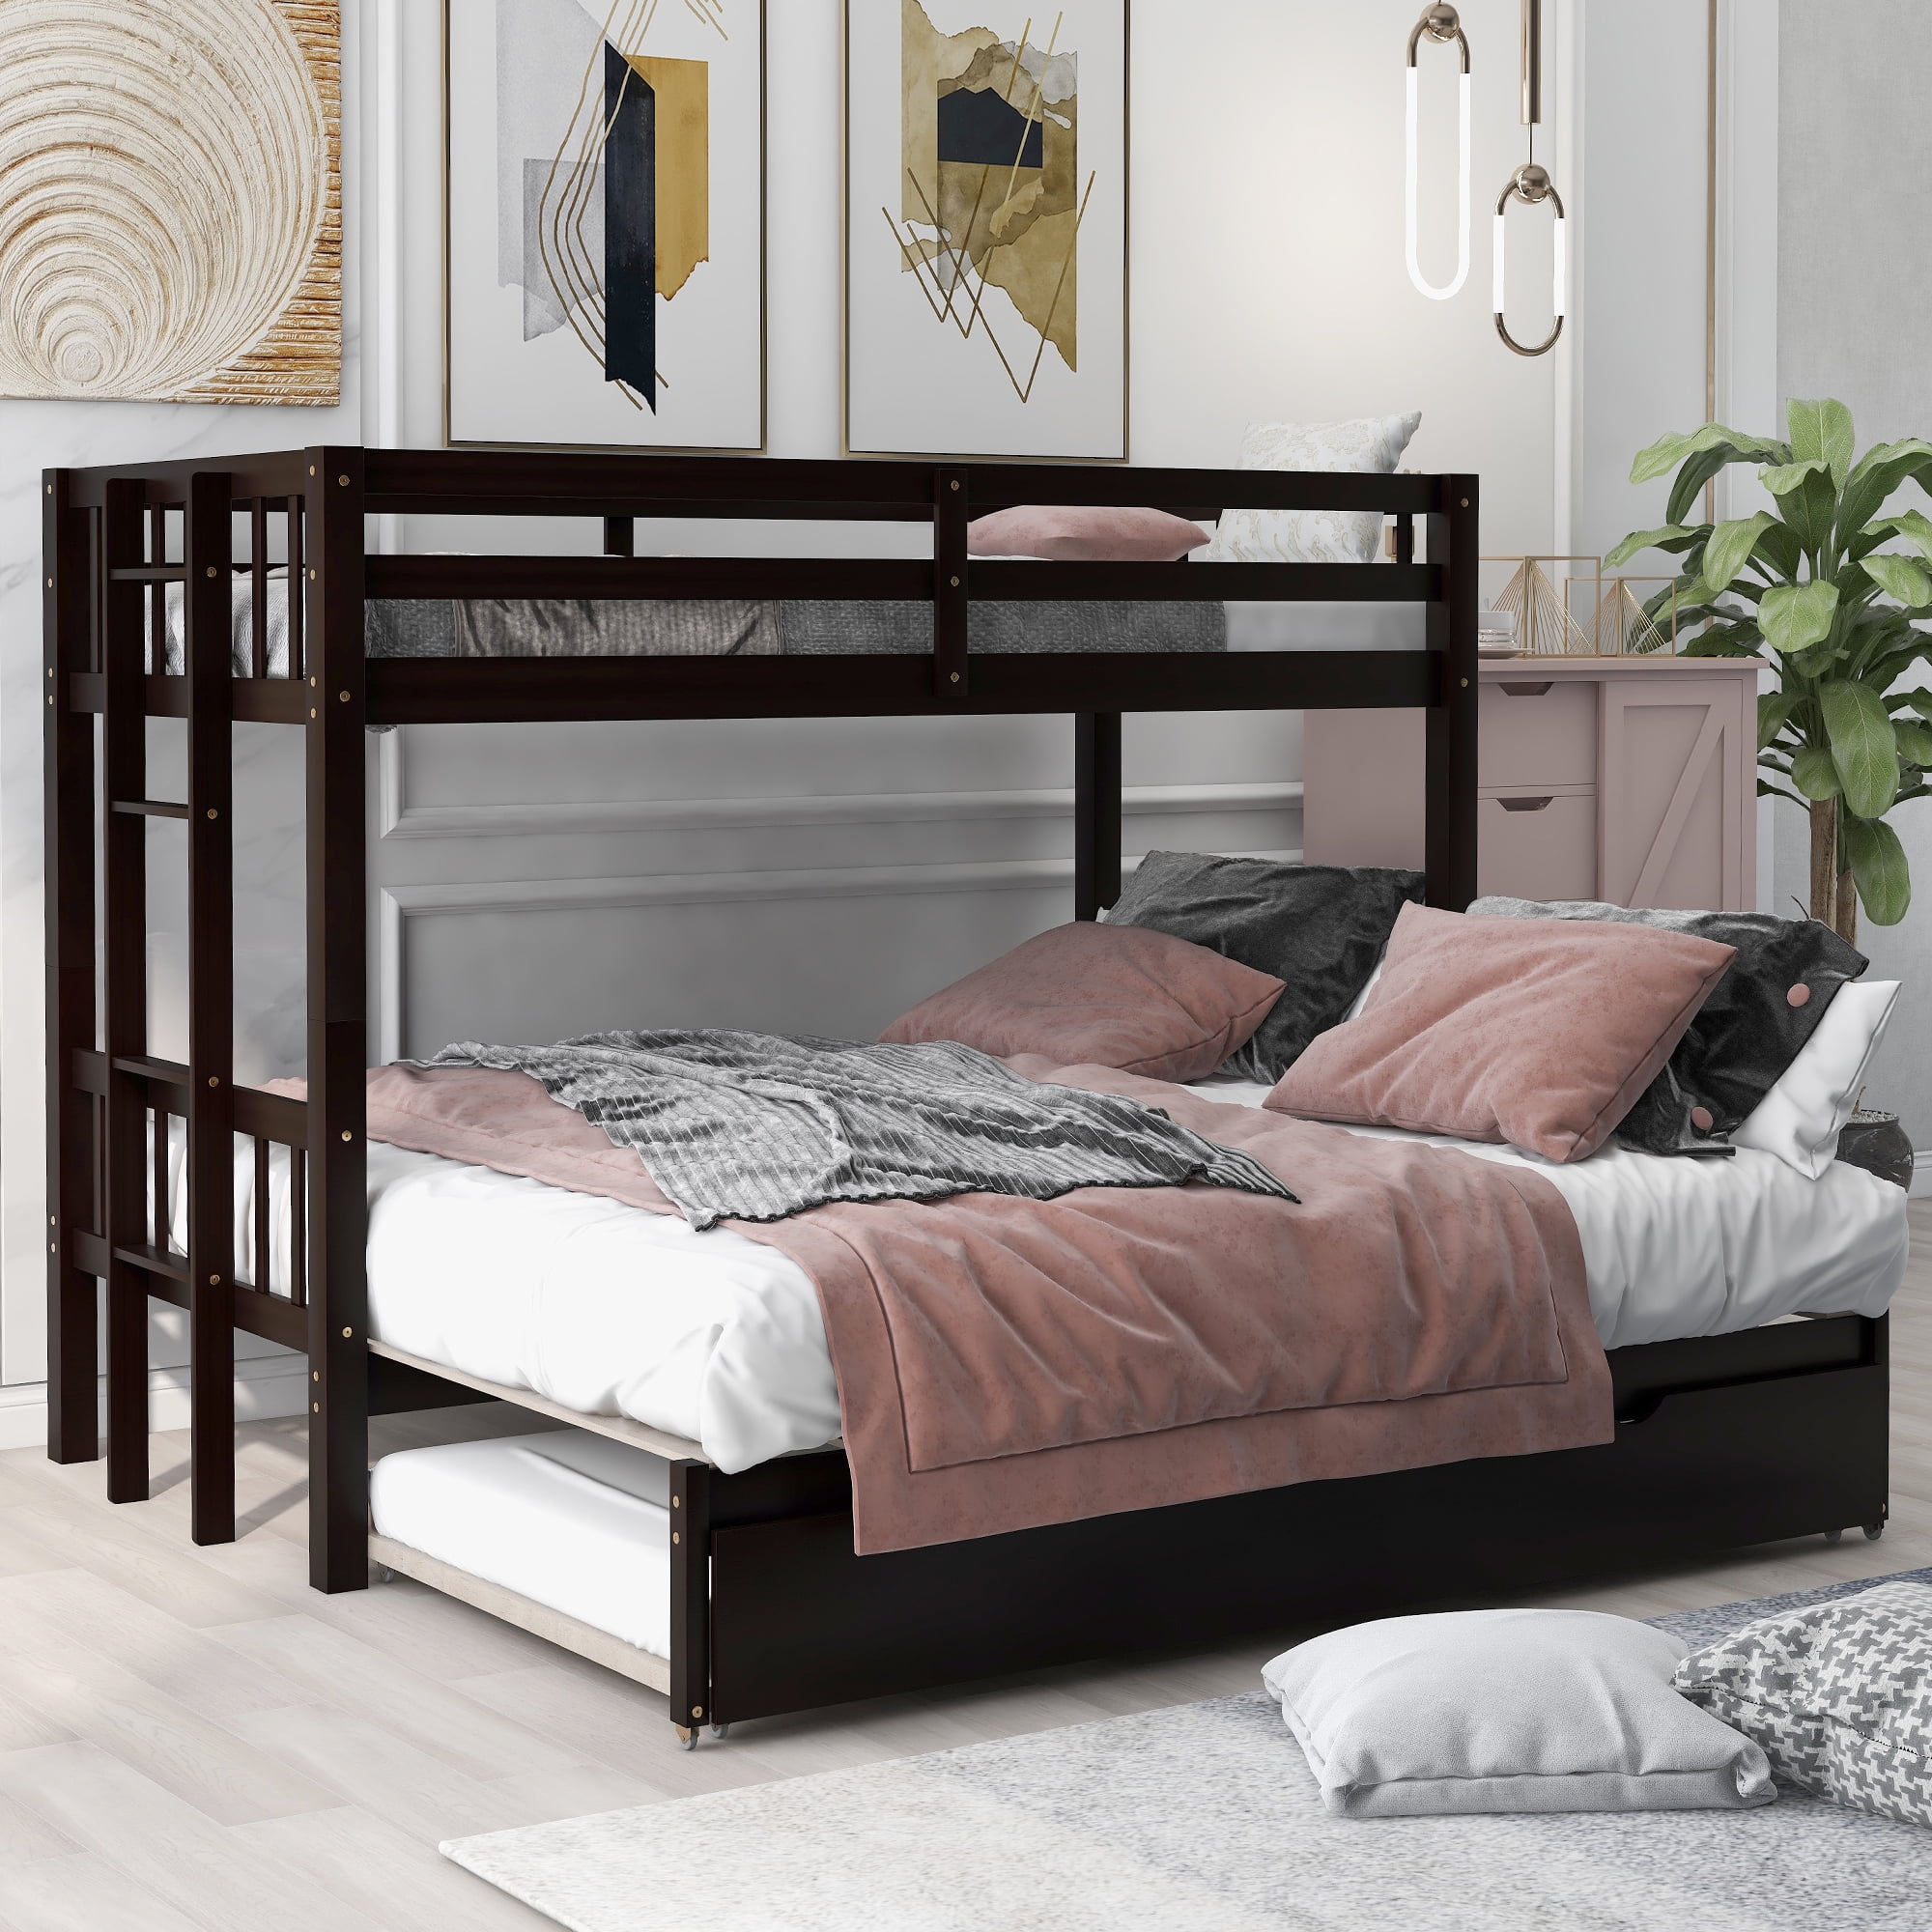 Bunk Bed with Trundle, Triple Bunk Bed, Kid's Convertible Twin Bed with